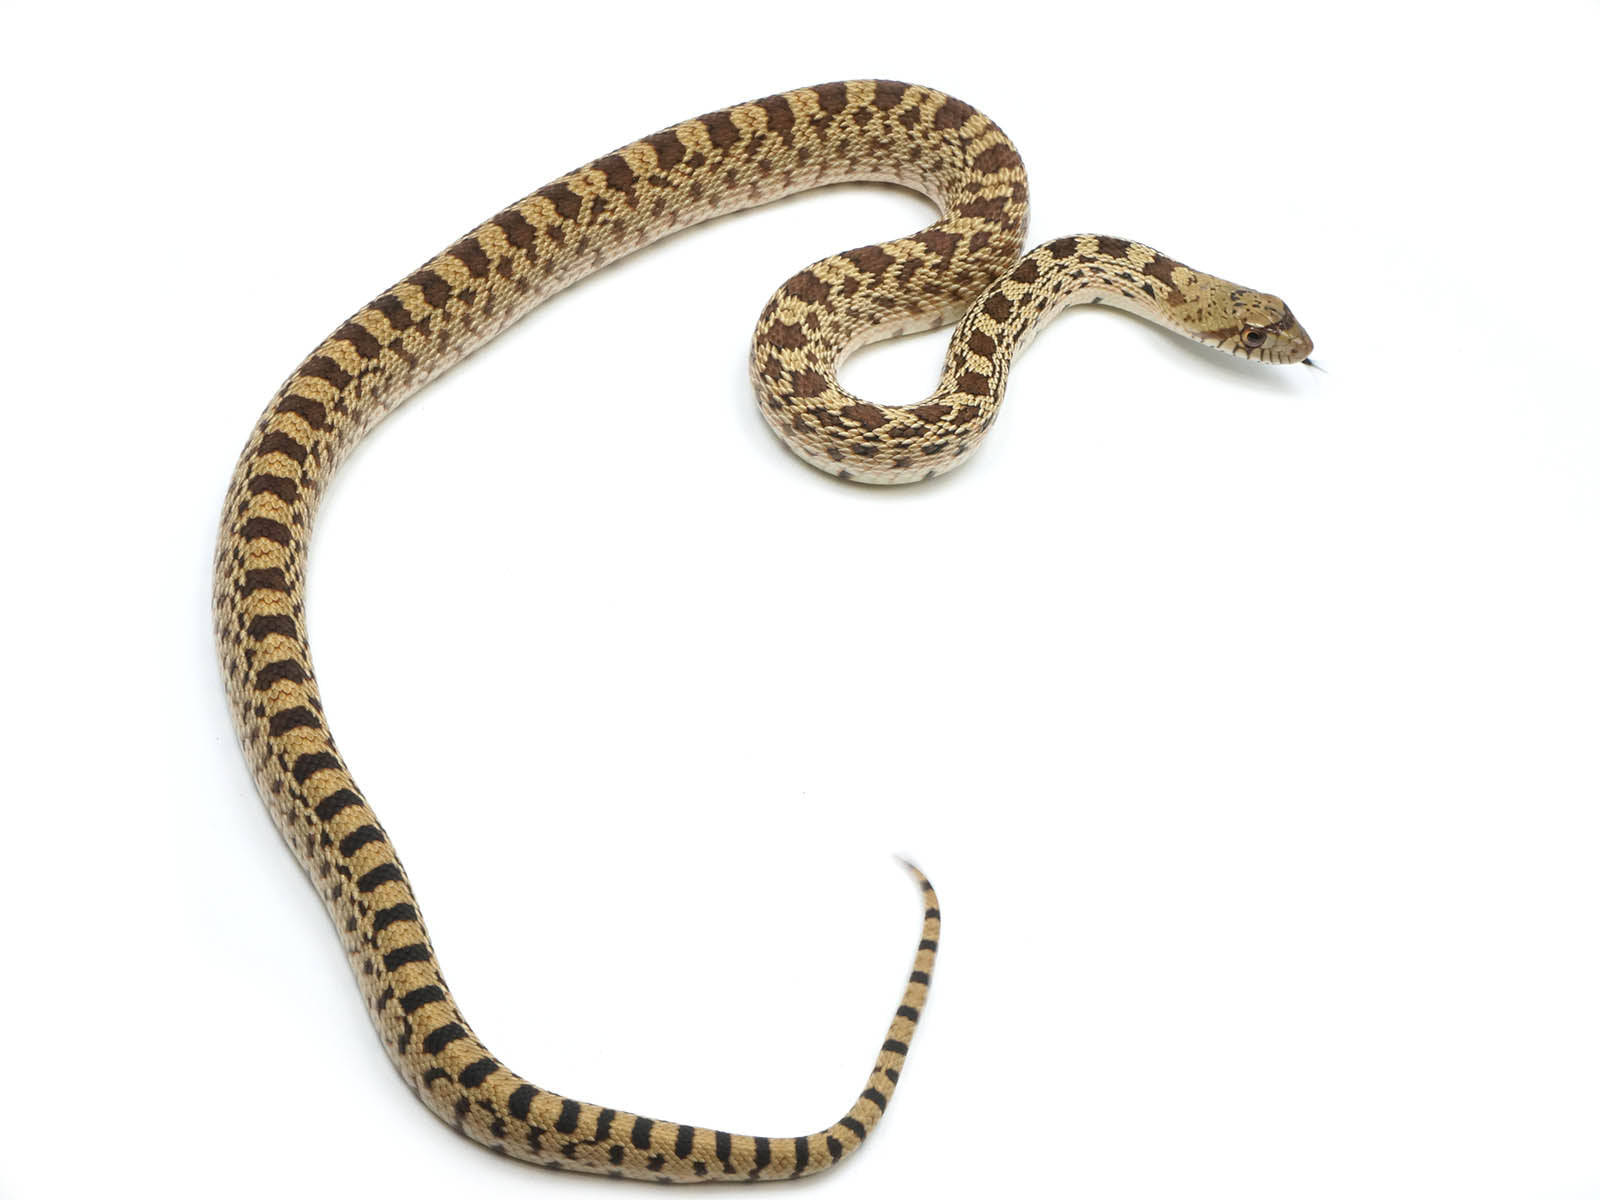 Gopher Snake With Striking Scale Pattern Wallpaper